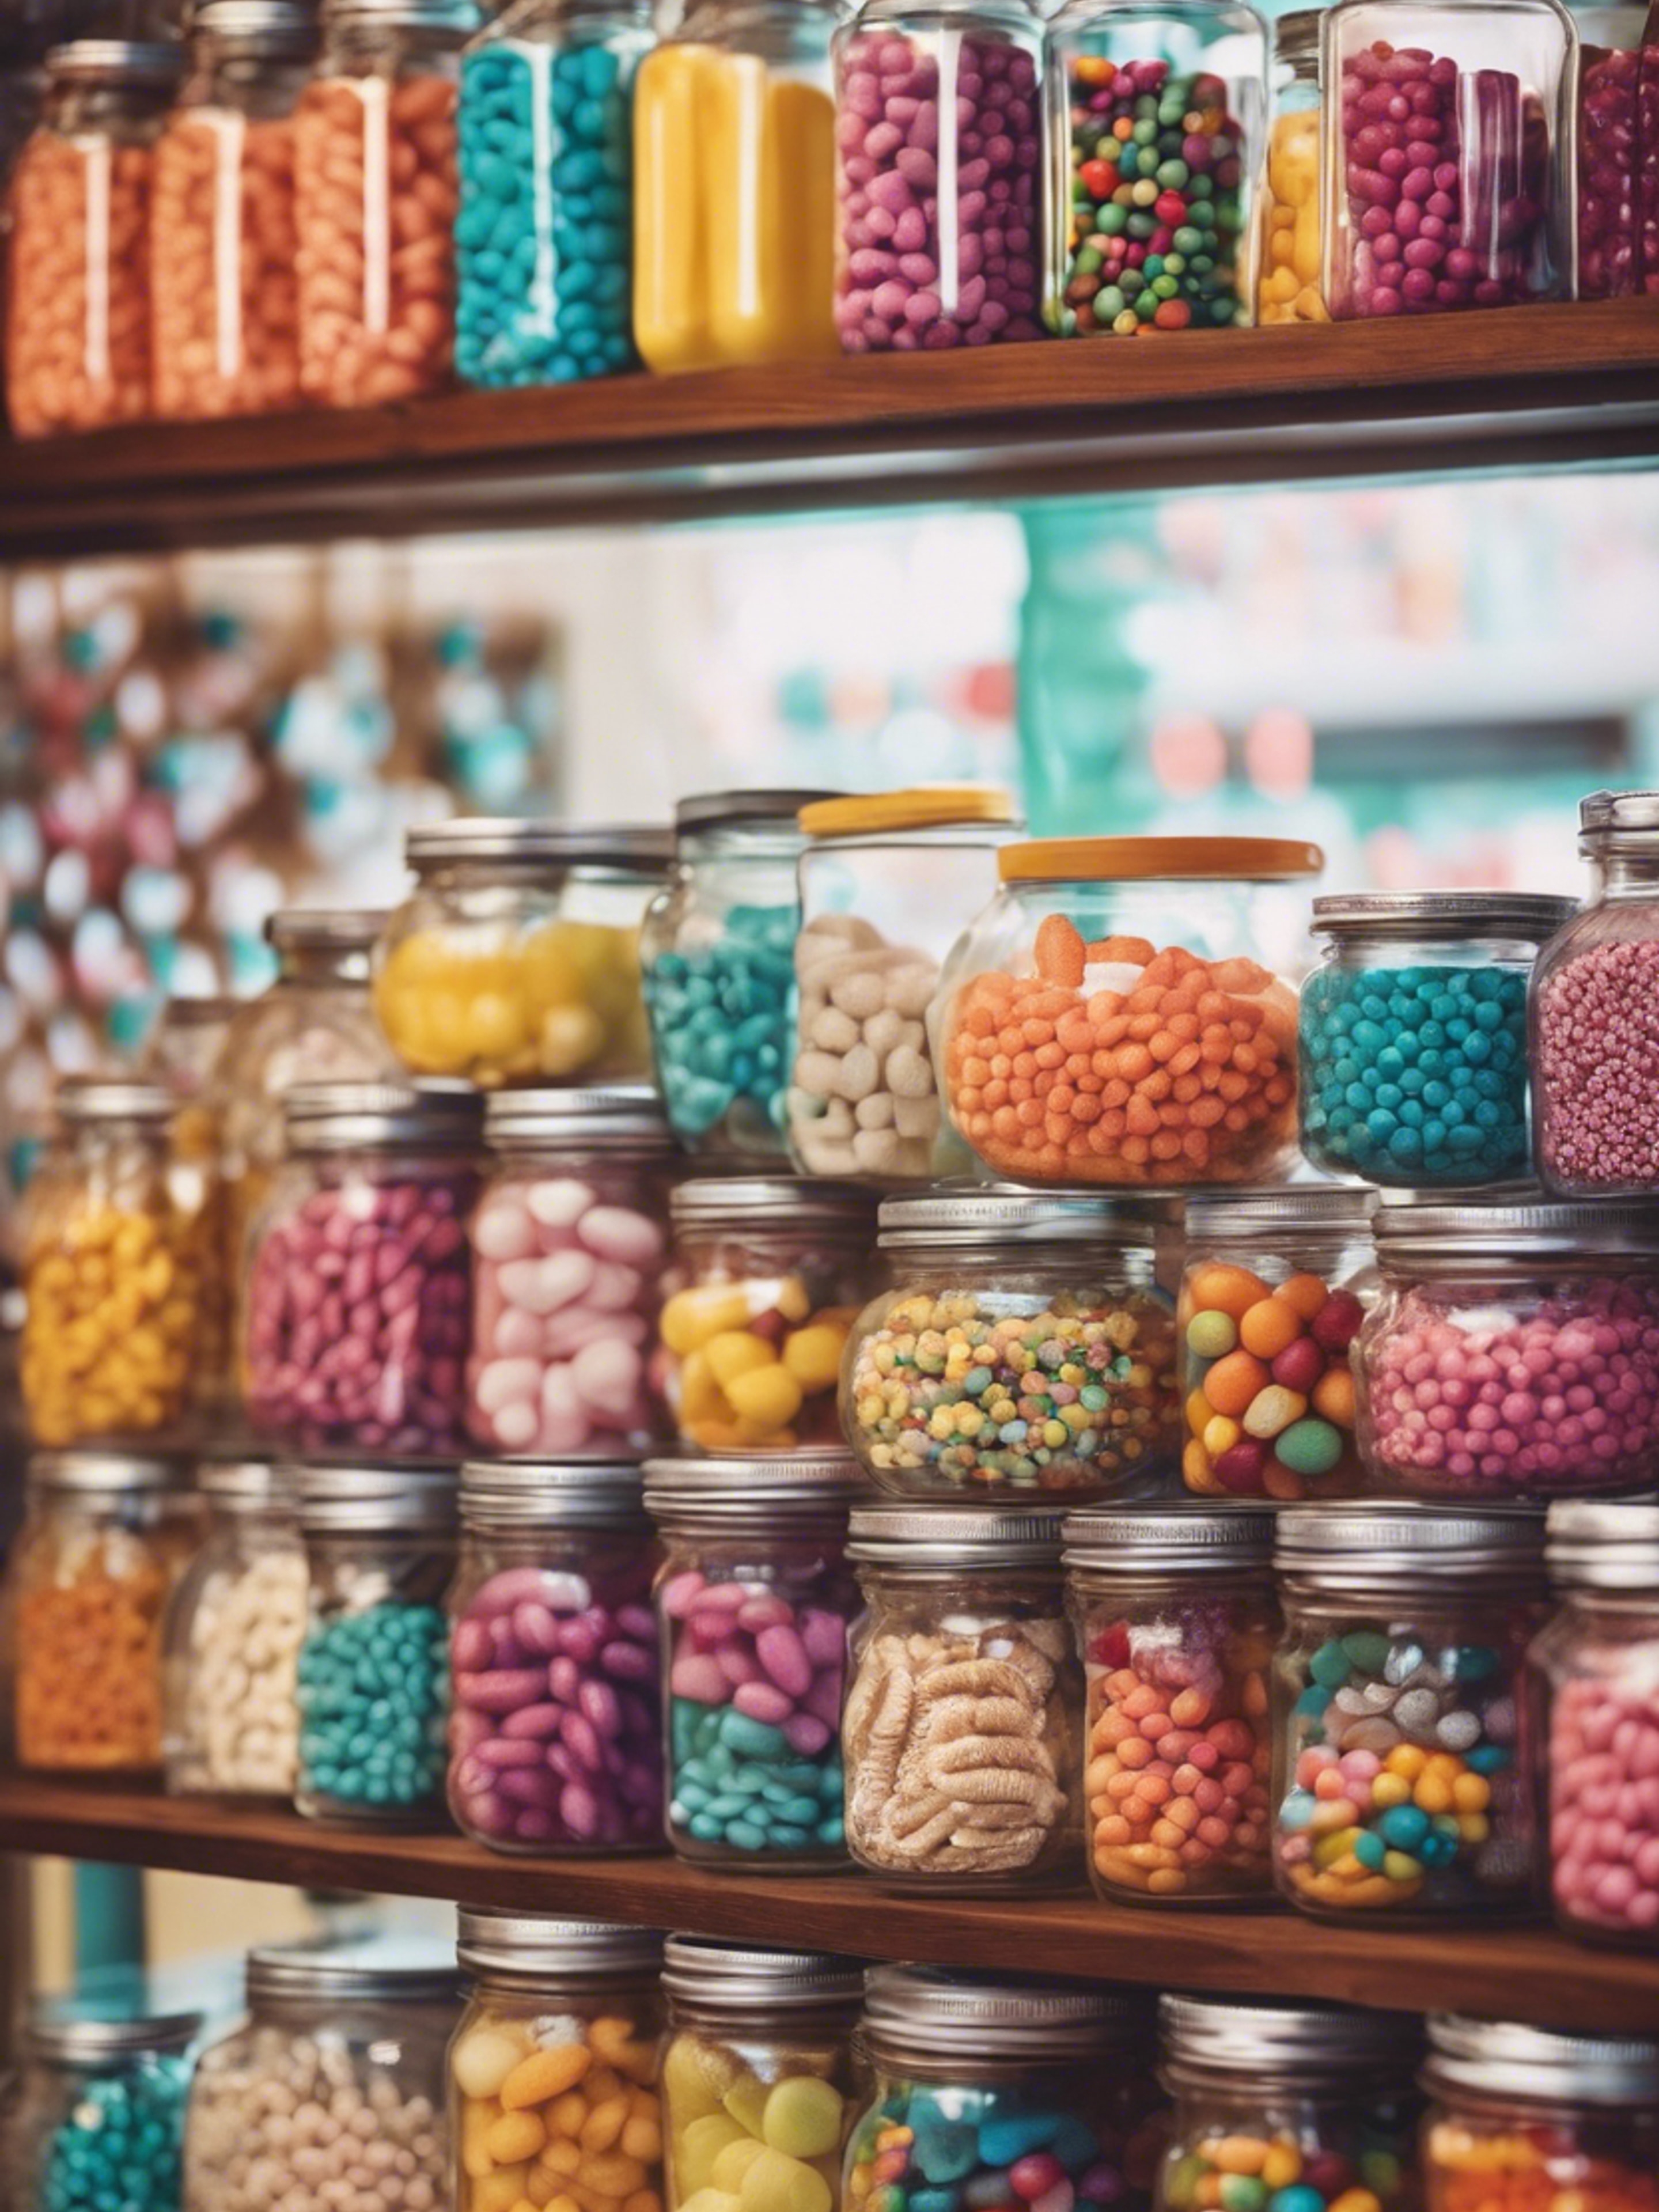 Retro candy store filled with jars of colorful treats. Hintergrund[53bdbe1ef5c6451abca1]